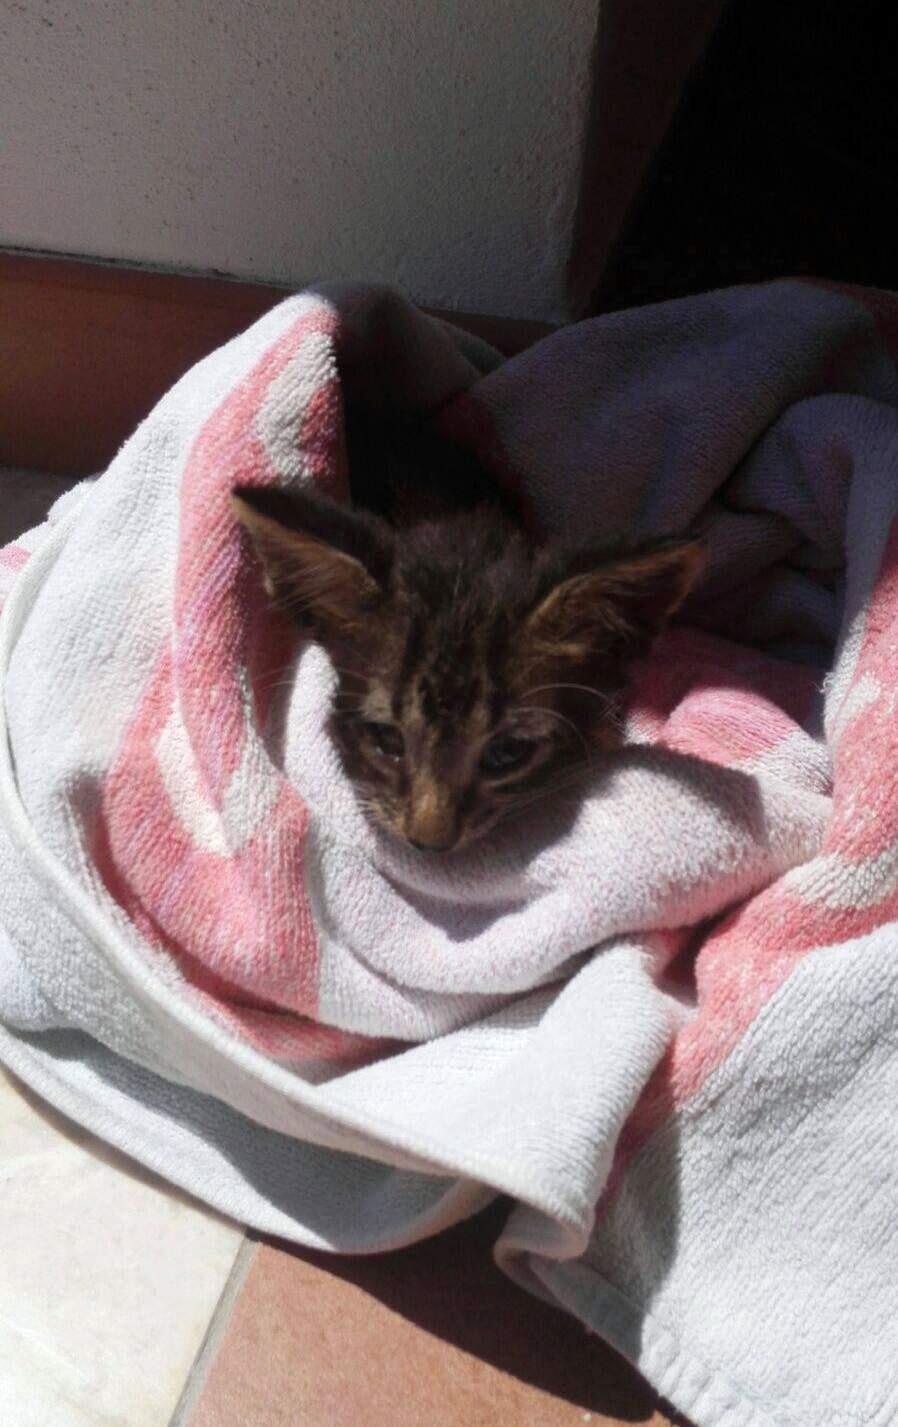 In this photo taken on Friday, Aug. 5, 2016 and provided by the Italian Coast Guard, a kitten is wrapped in a towel after being rescued from downing, off the coast of Marsala in Sicily, Italy. The Italian coast guard has rescued and revived a drowning kitten at a Sicilian port, after children on shore drew attention to its plight. A video released Friday showed crew members administering mouth-to-mouth resuscitation and massaging the kitten to remove water from its lungs, encouraging the kitten, ‘'Breath, breath. Wake up.'' After a few minutes, the kitten, which is not more than a month old, emitted a few weak ‘'meows.'' (Italian Coast Guard via AP)